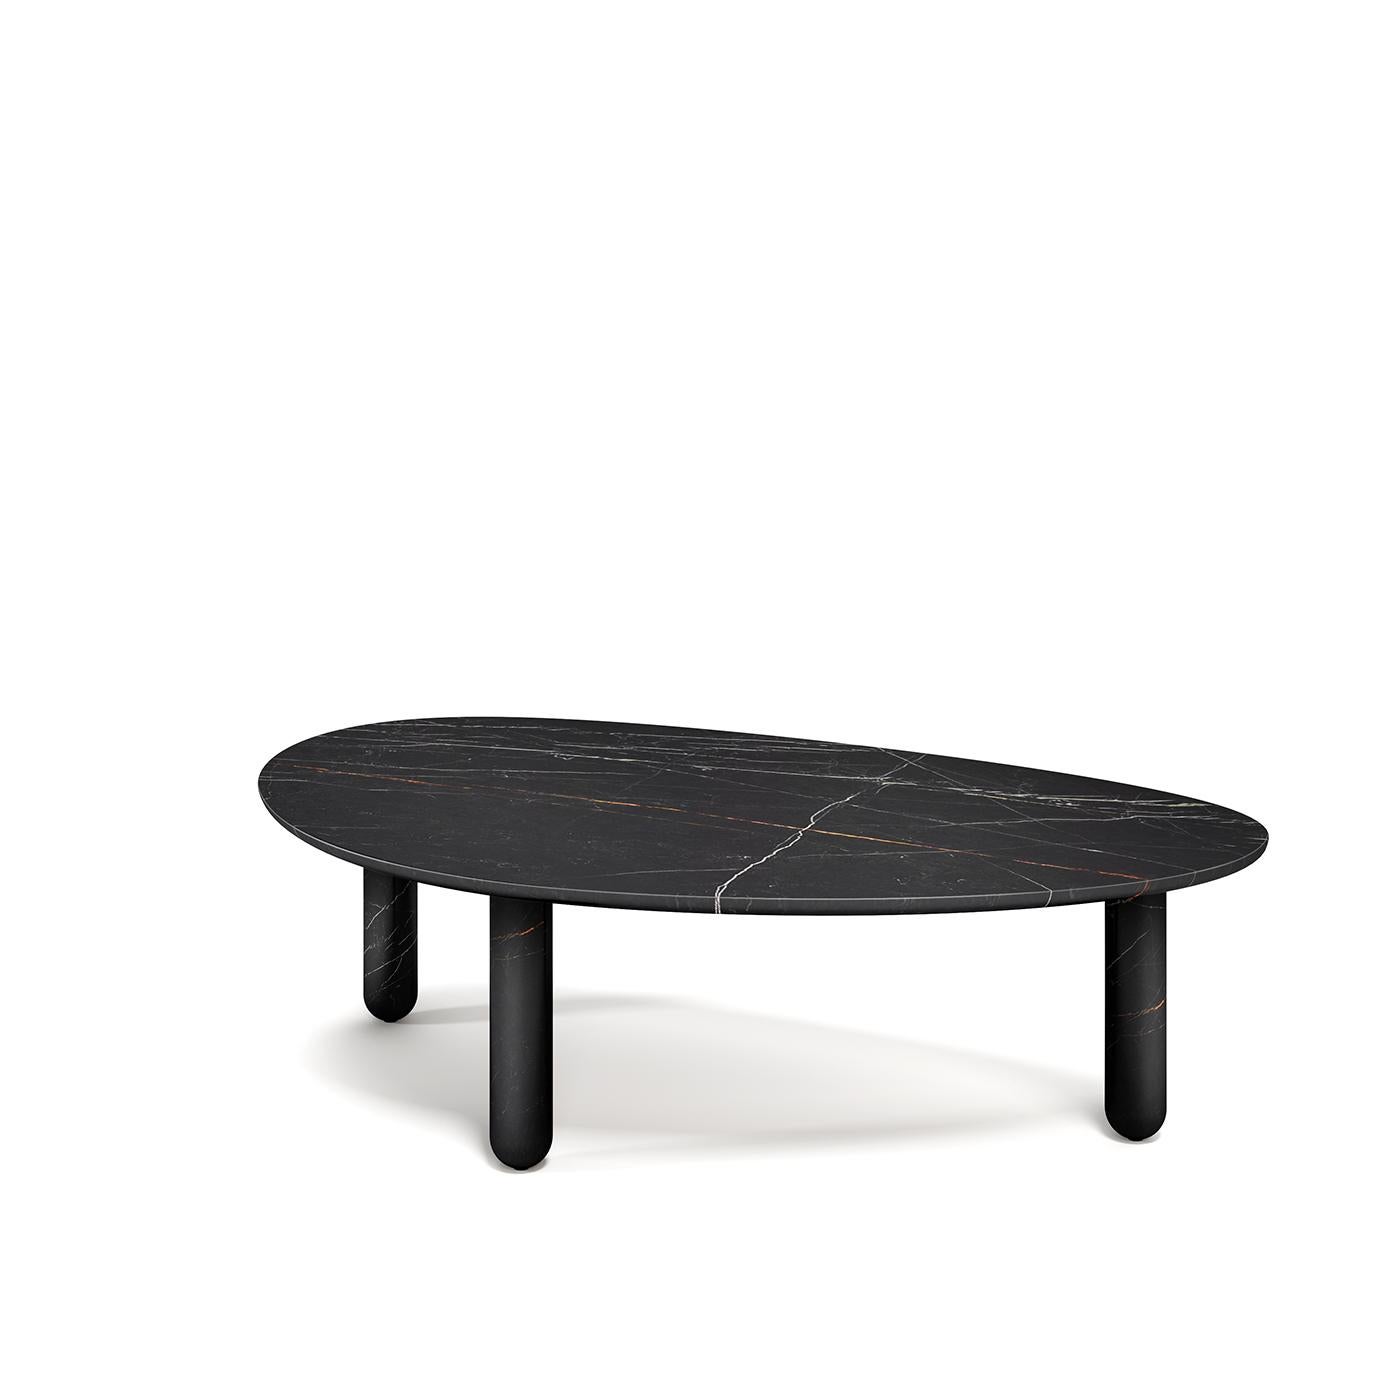 Coffee table entirely made in New Saint Laurent marble. The three cylindrical legs made from a solid block are connected to the asymmetrical curved top to create an organic, pebble-like sculpture.